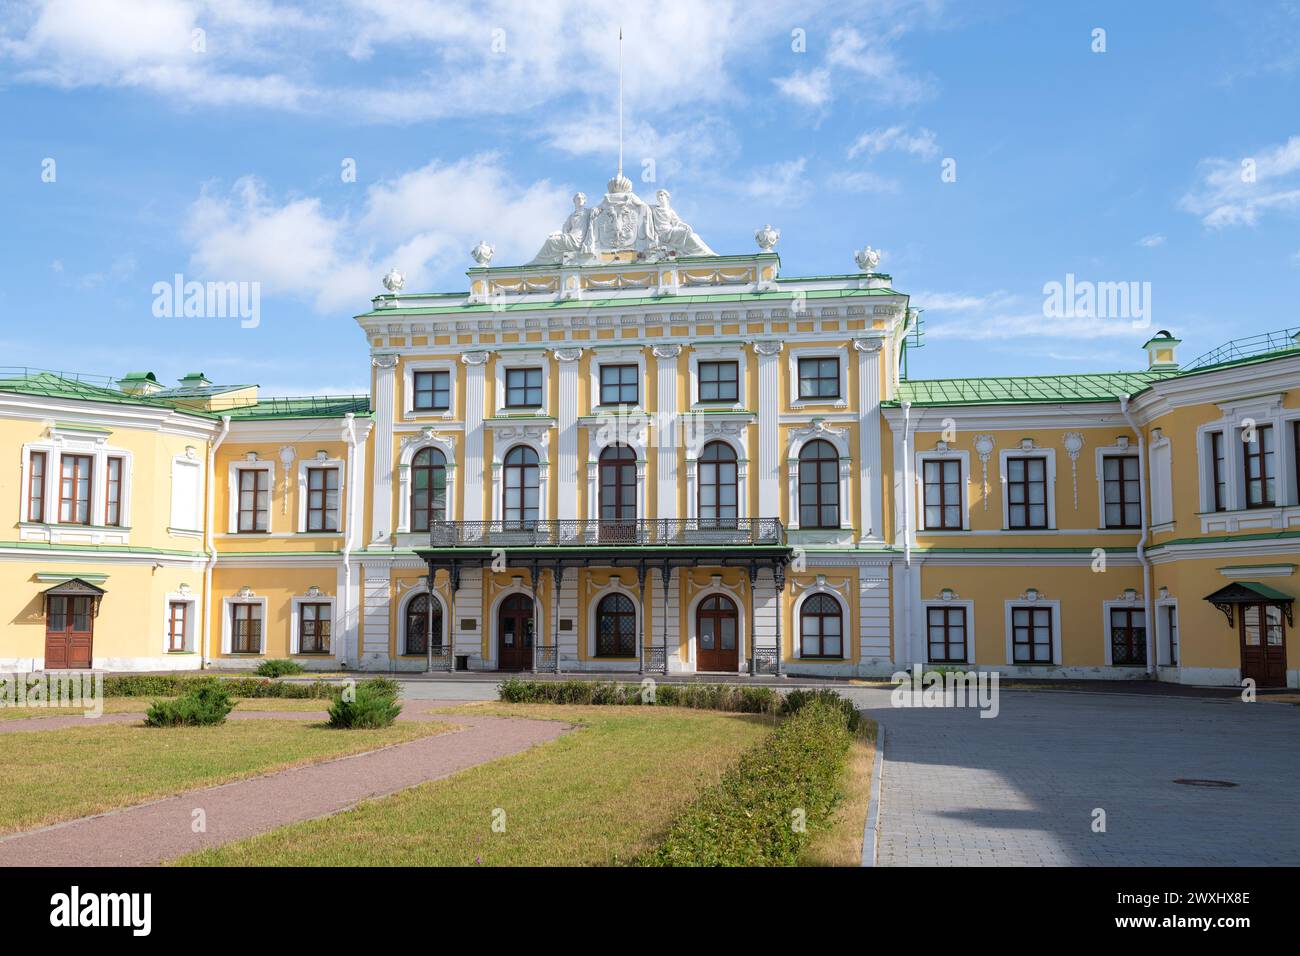 The ancient Imperial Travel Palace on a sunny July day. Tver, Russia Stock Photo